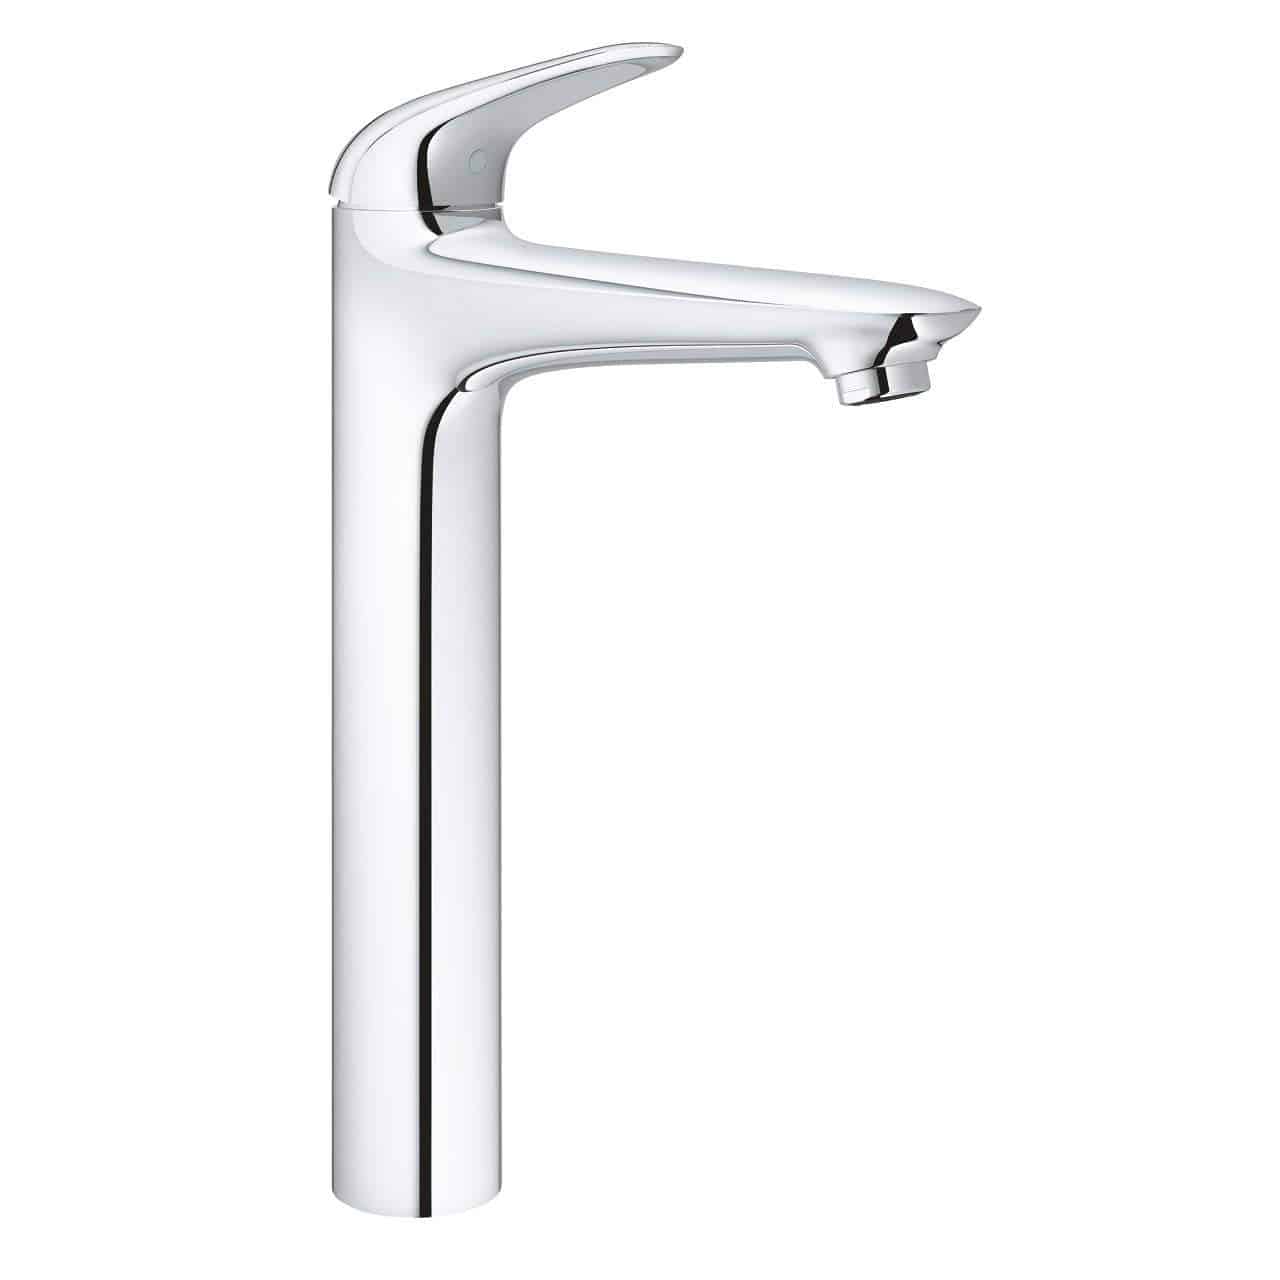 Eurostyle 浴室單把手面盆龍頭XL號 Bathroom Single-Lever Basin Mixer XL-Size-Grohe-23719003-Home Manner